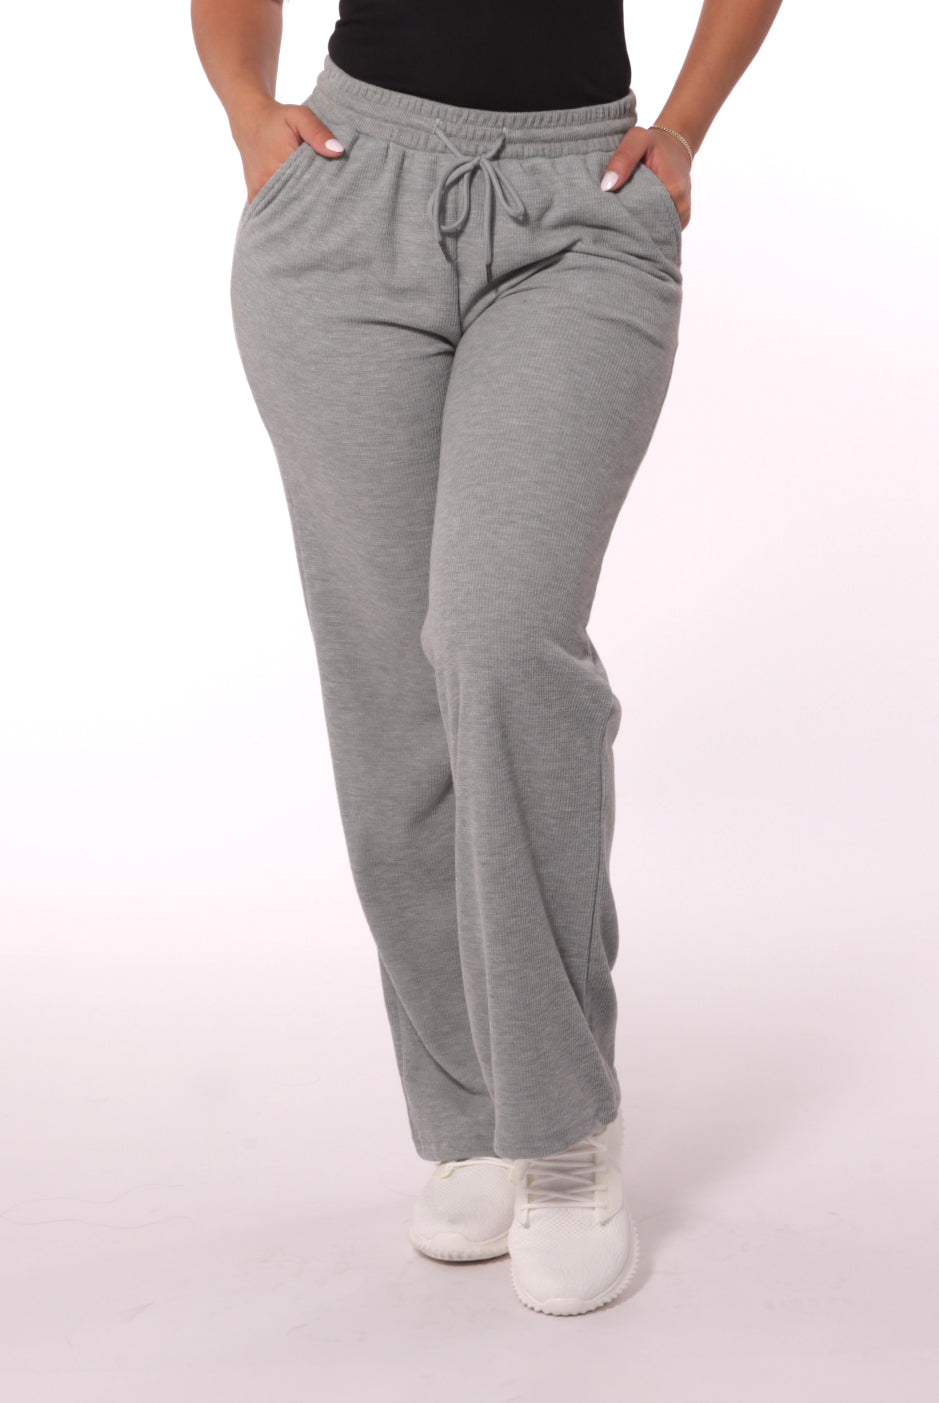 ShoSho Womens Winter Cozy Flecce Lined Joggers Warm Track